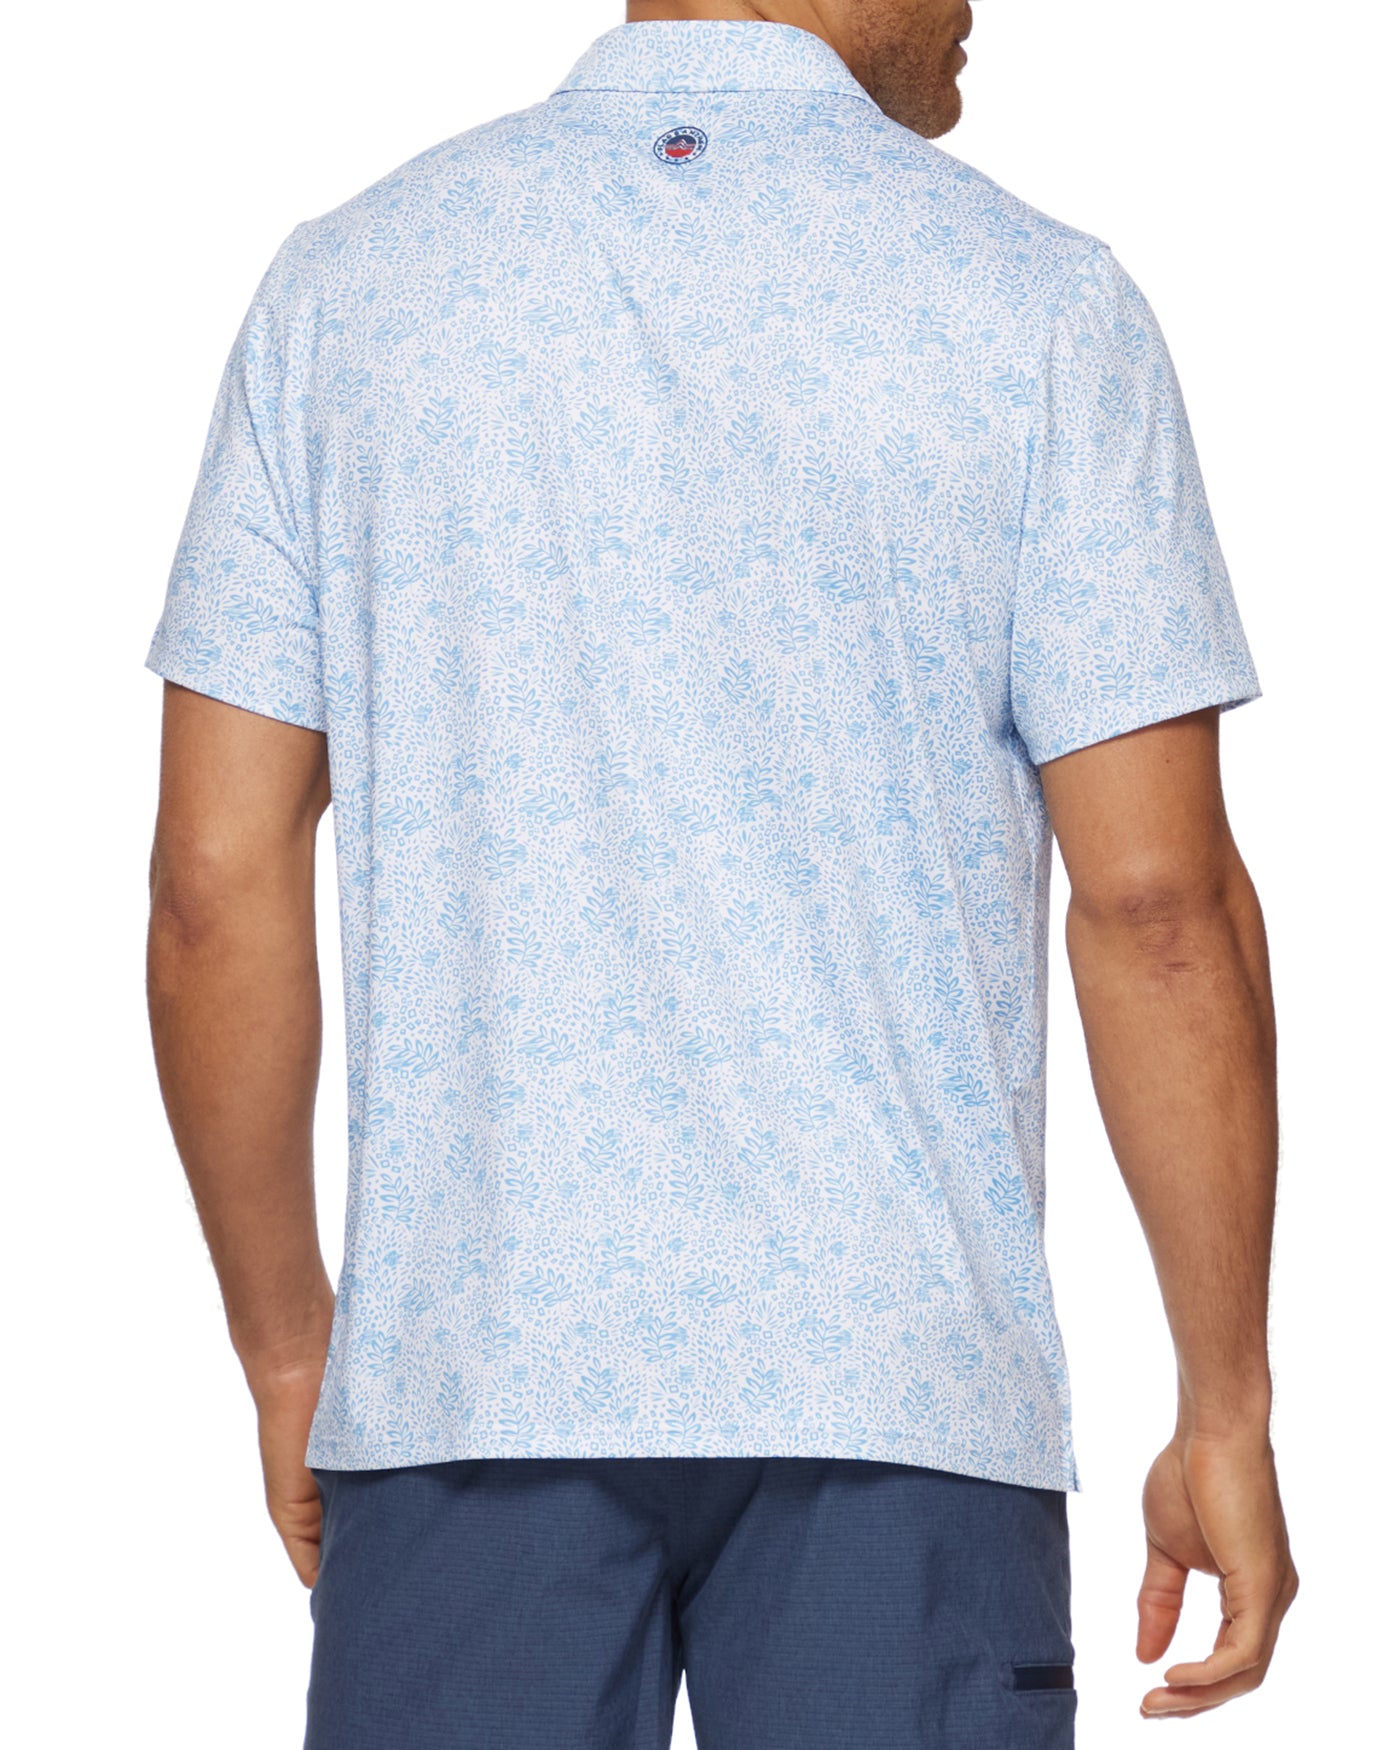 WILLOUGHBY LEAF PRINT PERFORMANCE POLO